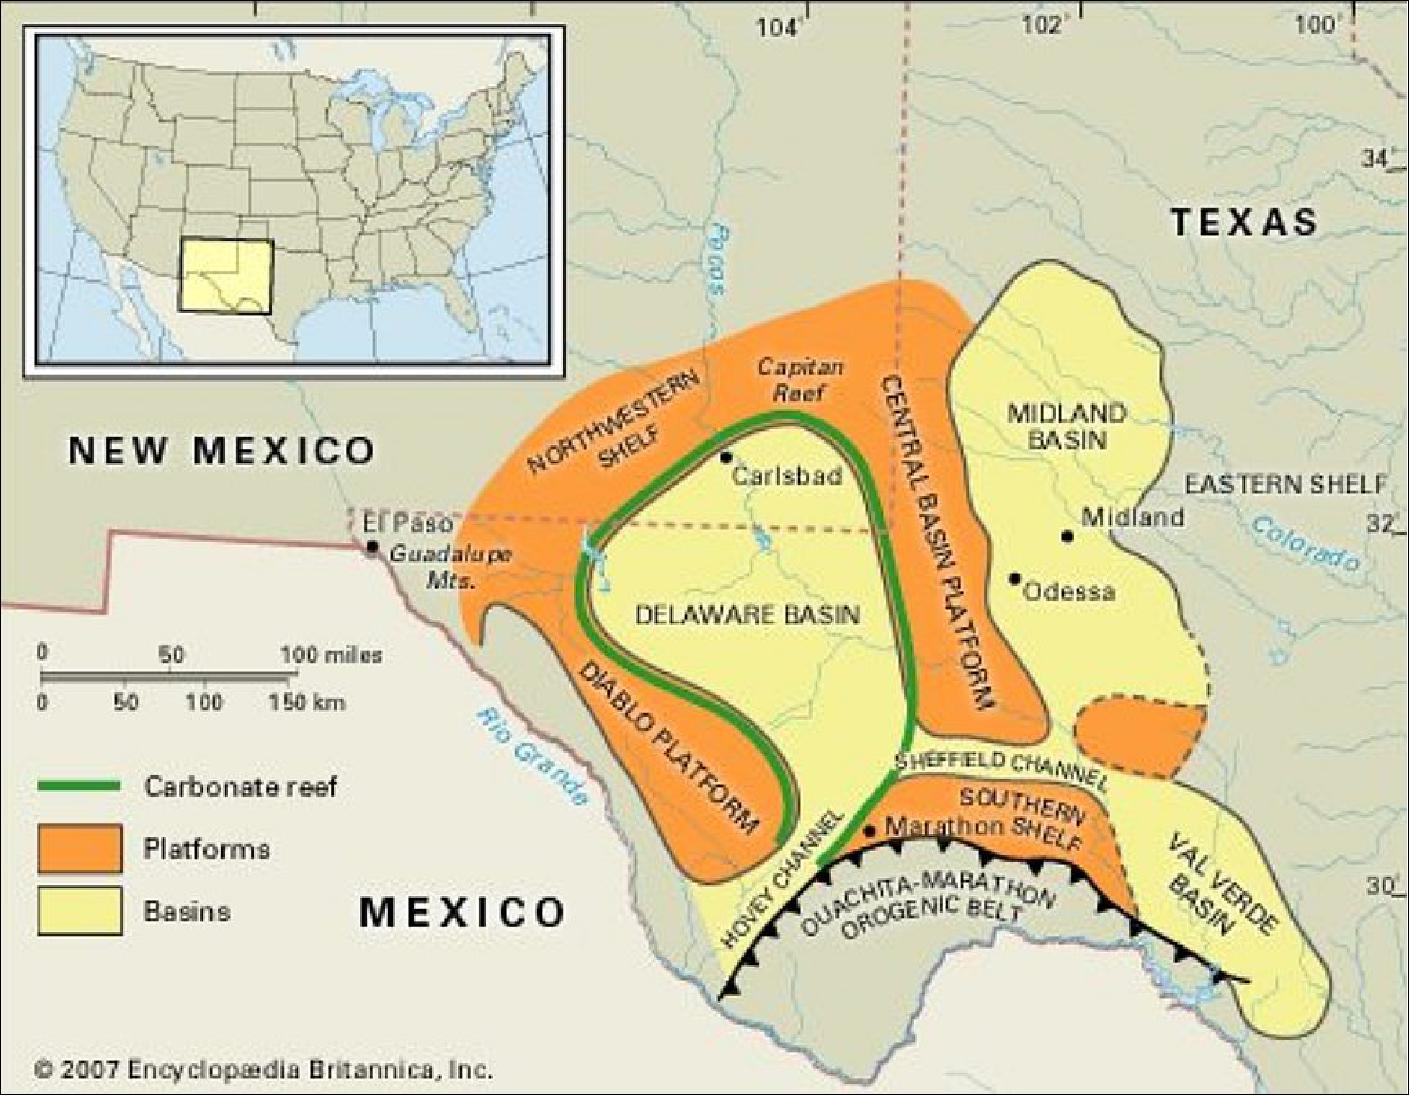 Figure 7: Map of the basins, reefs, and platforms that make up the Permian Basin in West Texas (image credit: Encyclopedia Britannica, Inc.)